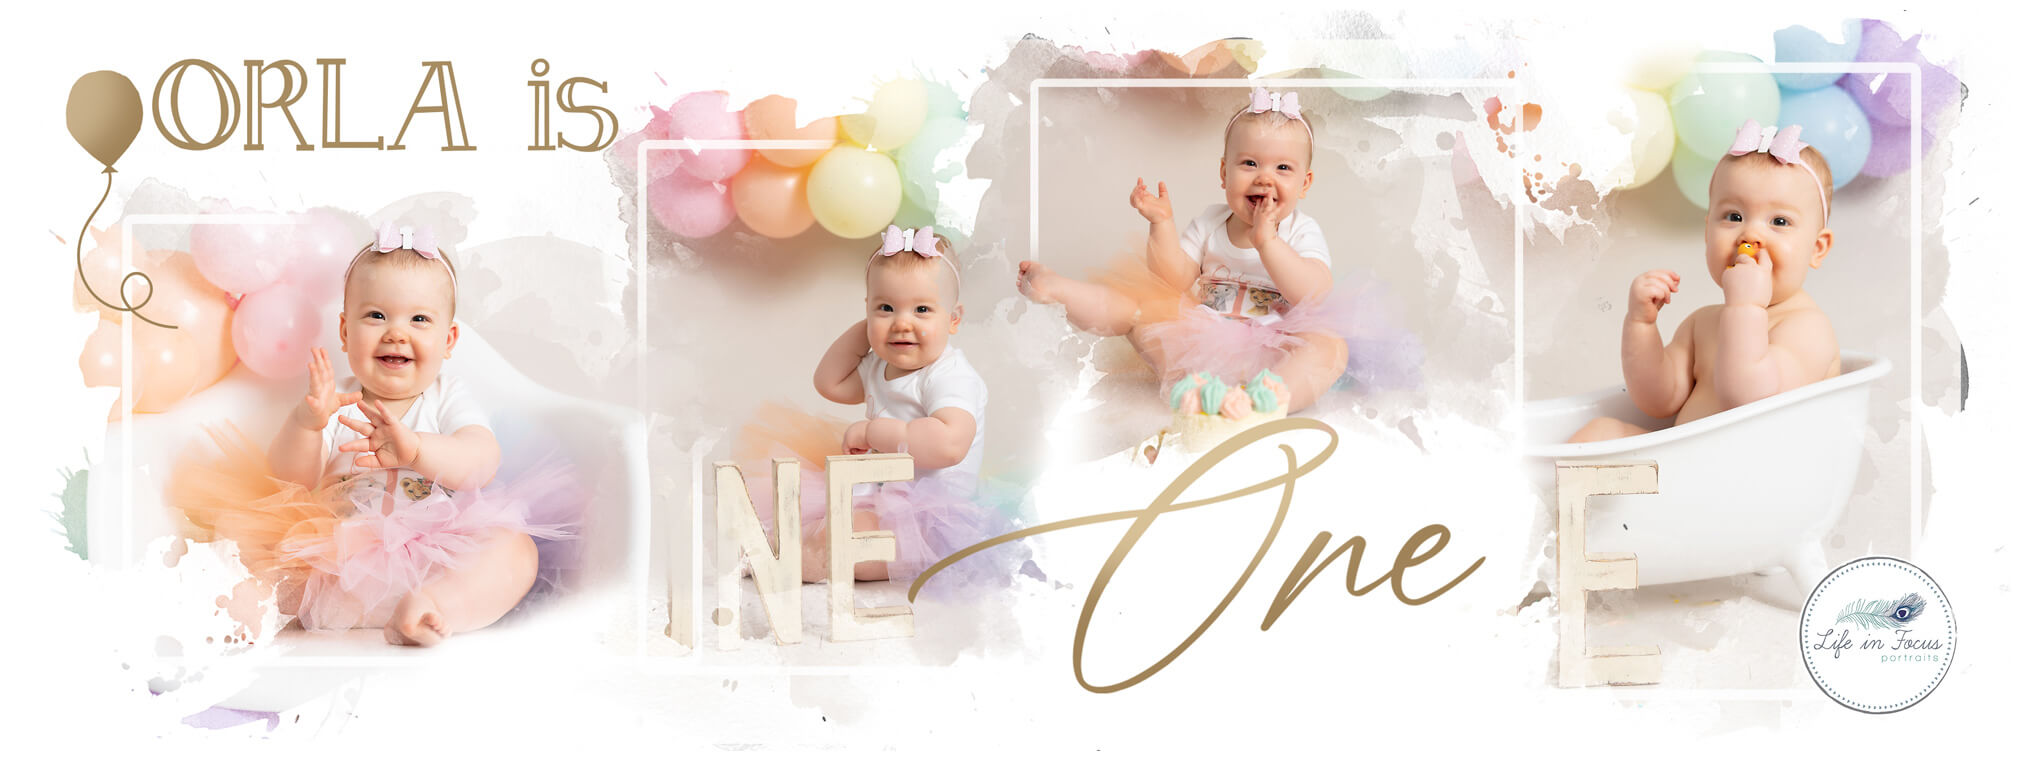 photos of baby girl with rainbow balloon arch at cake smash photo session